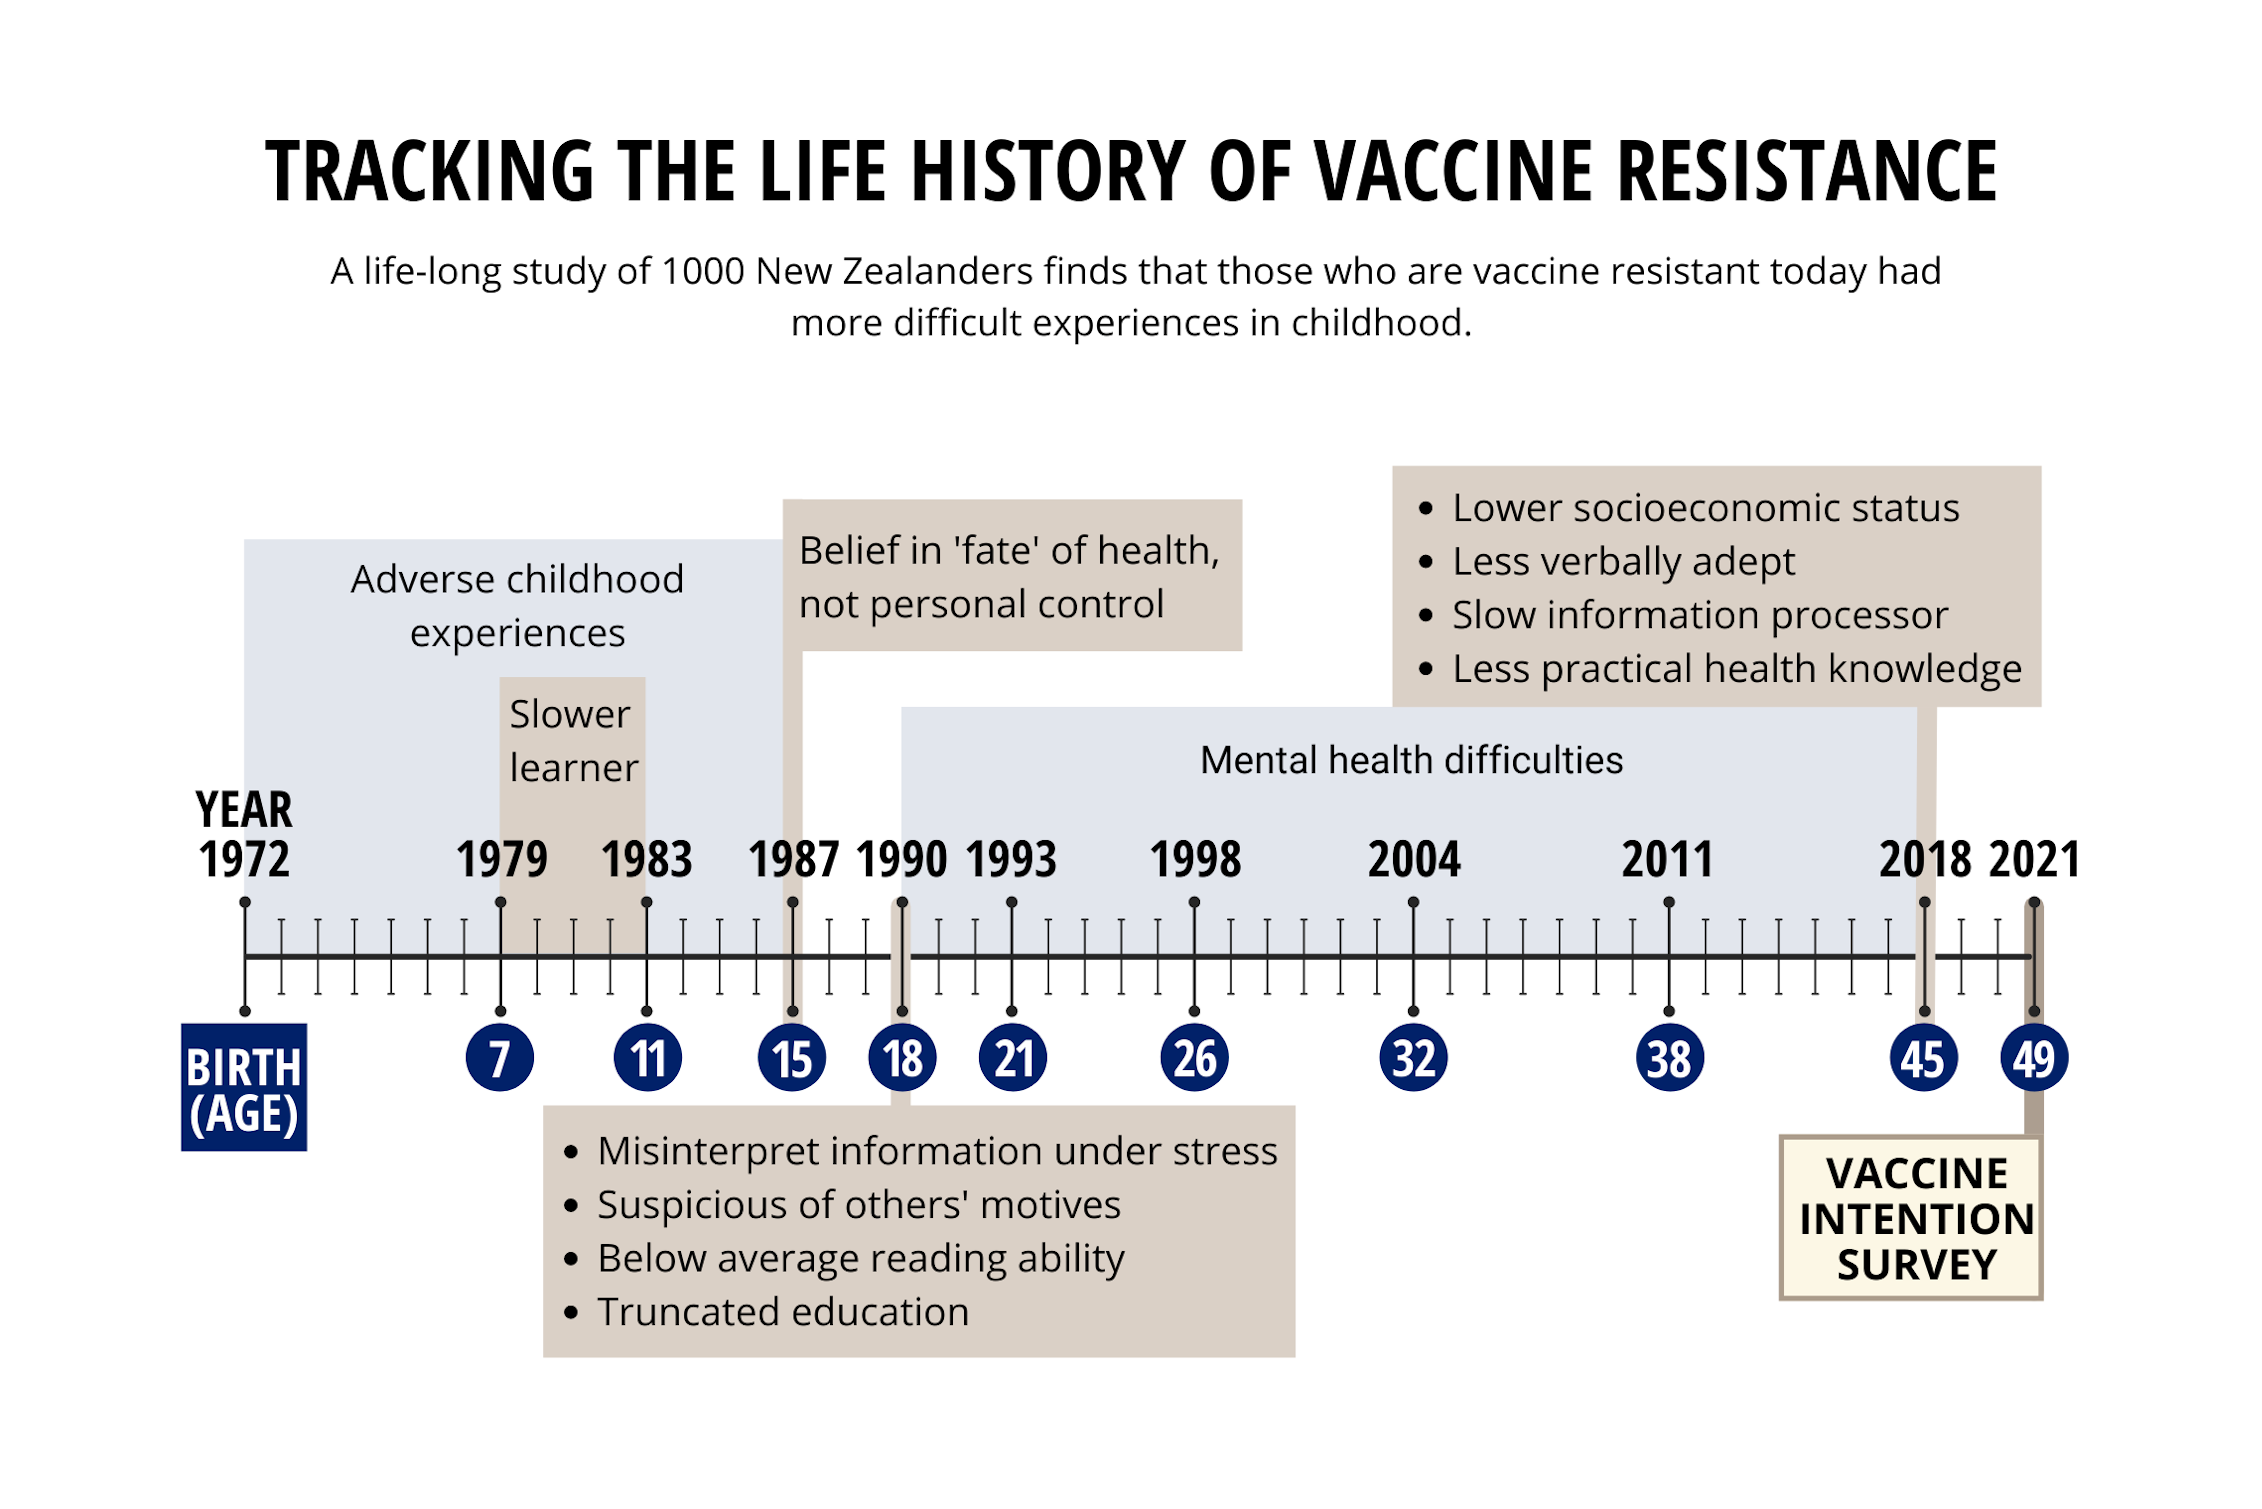 A graph that tracks the life history of vaccine resistance